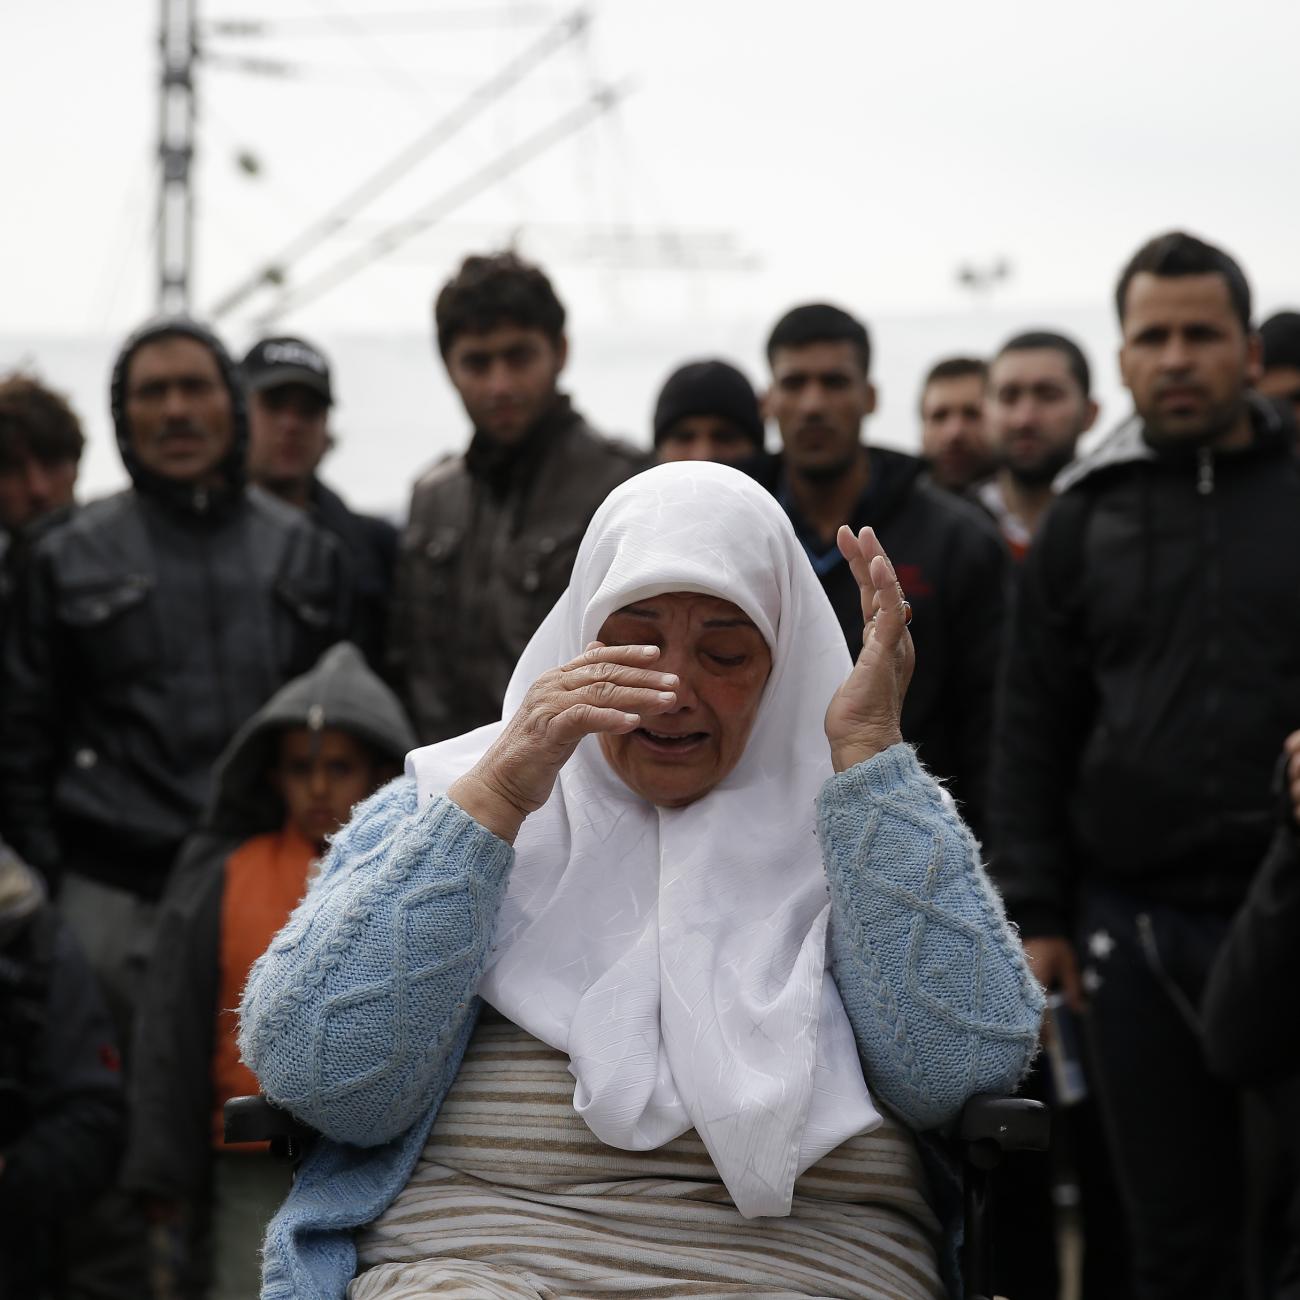 A displaced woman in a wheelchair cries during a protest at a makeshift camp at the Greek-Macedonian border near the village of Idomeni, Greece, on March 27, 2016.